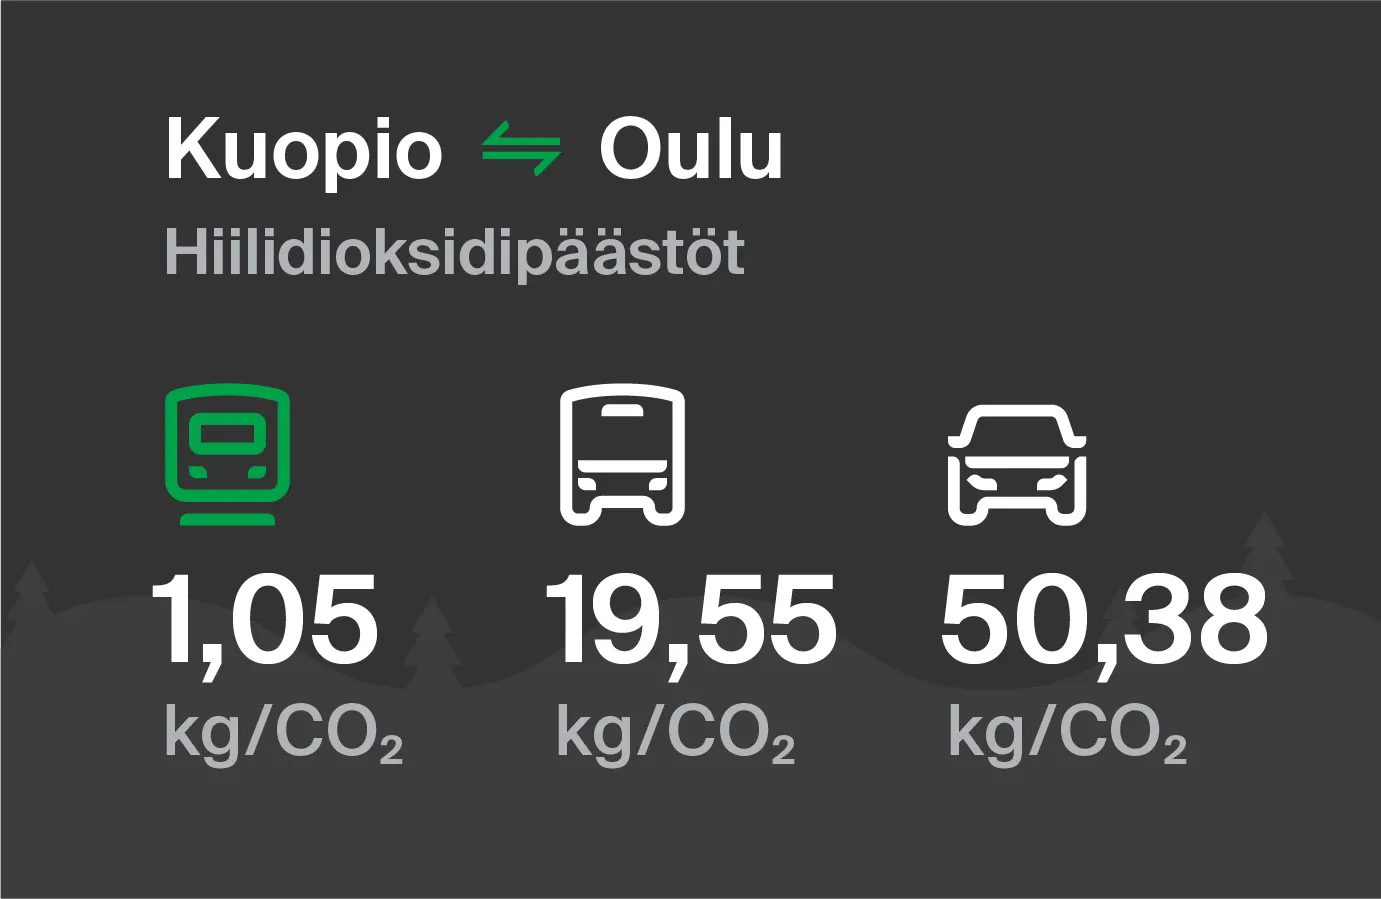 Carbon dioxide emissions from Kuopio to Oulu by different modes of transport: by train 1.05 kg/CO2, by bus 19.55 kg/CO2 and by car 50.38 kg/CO2.